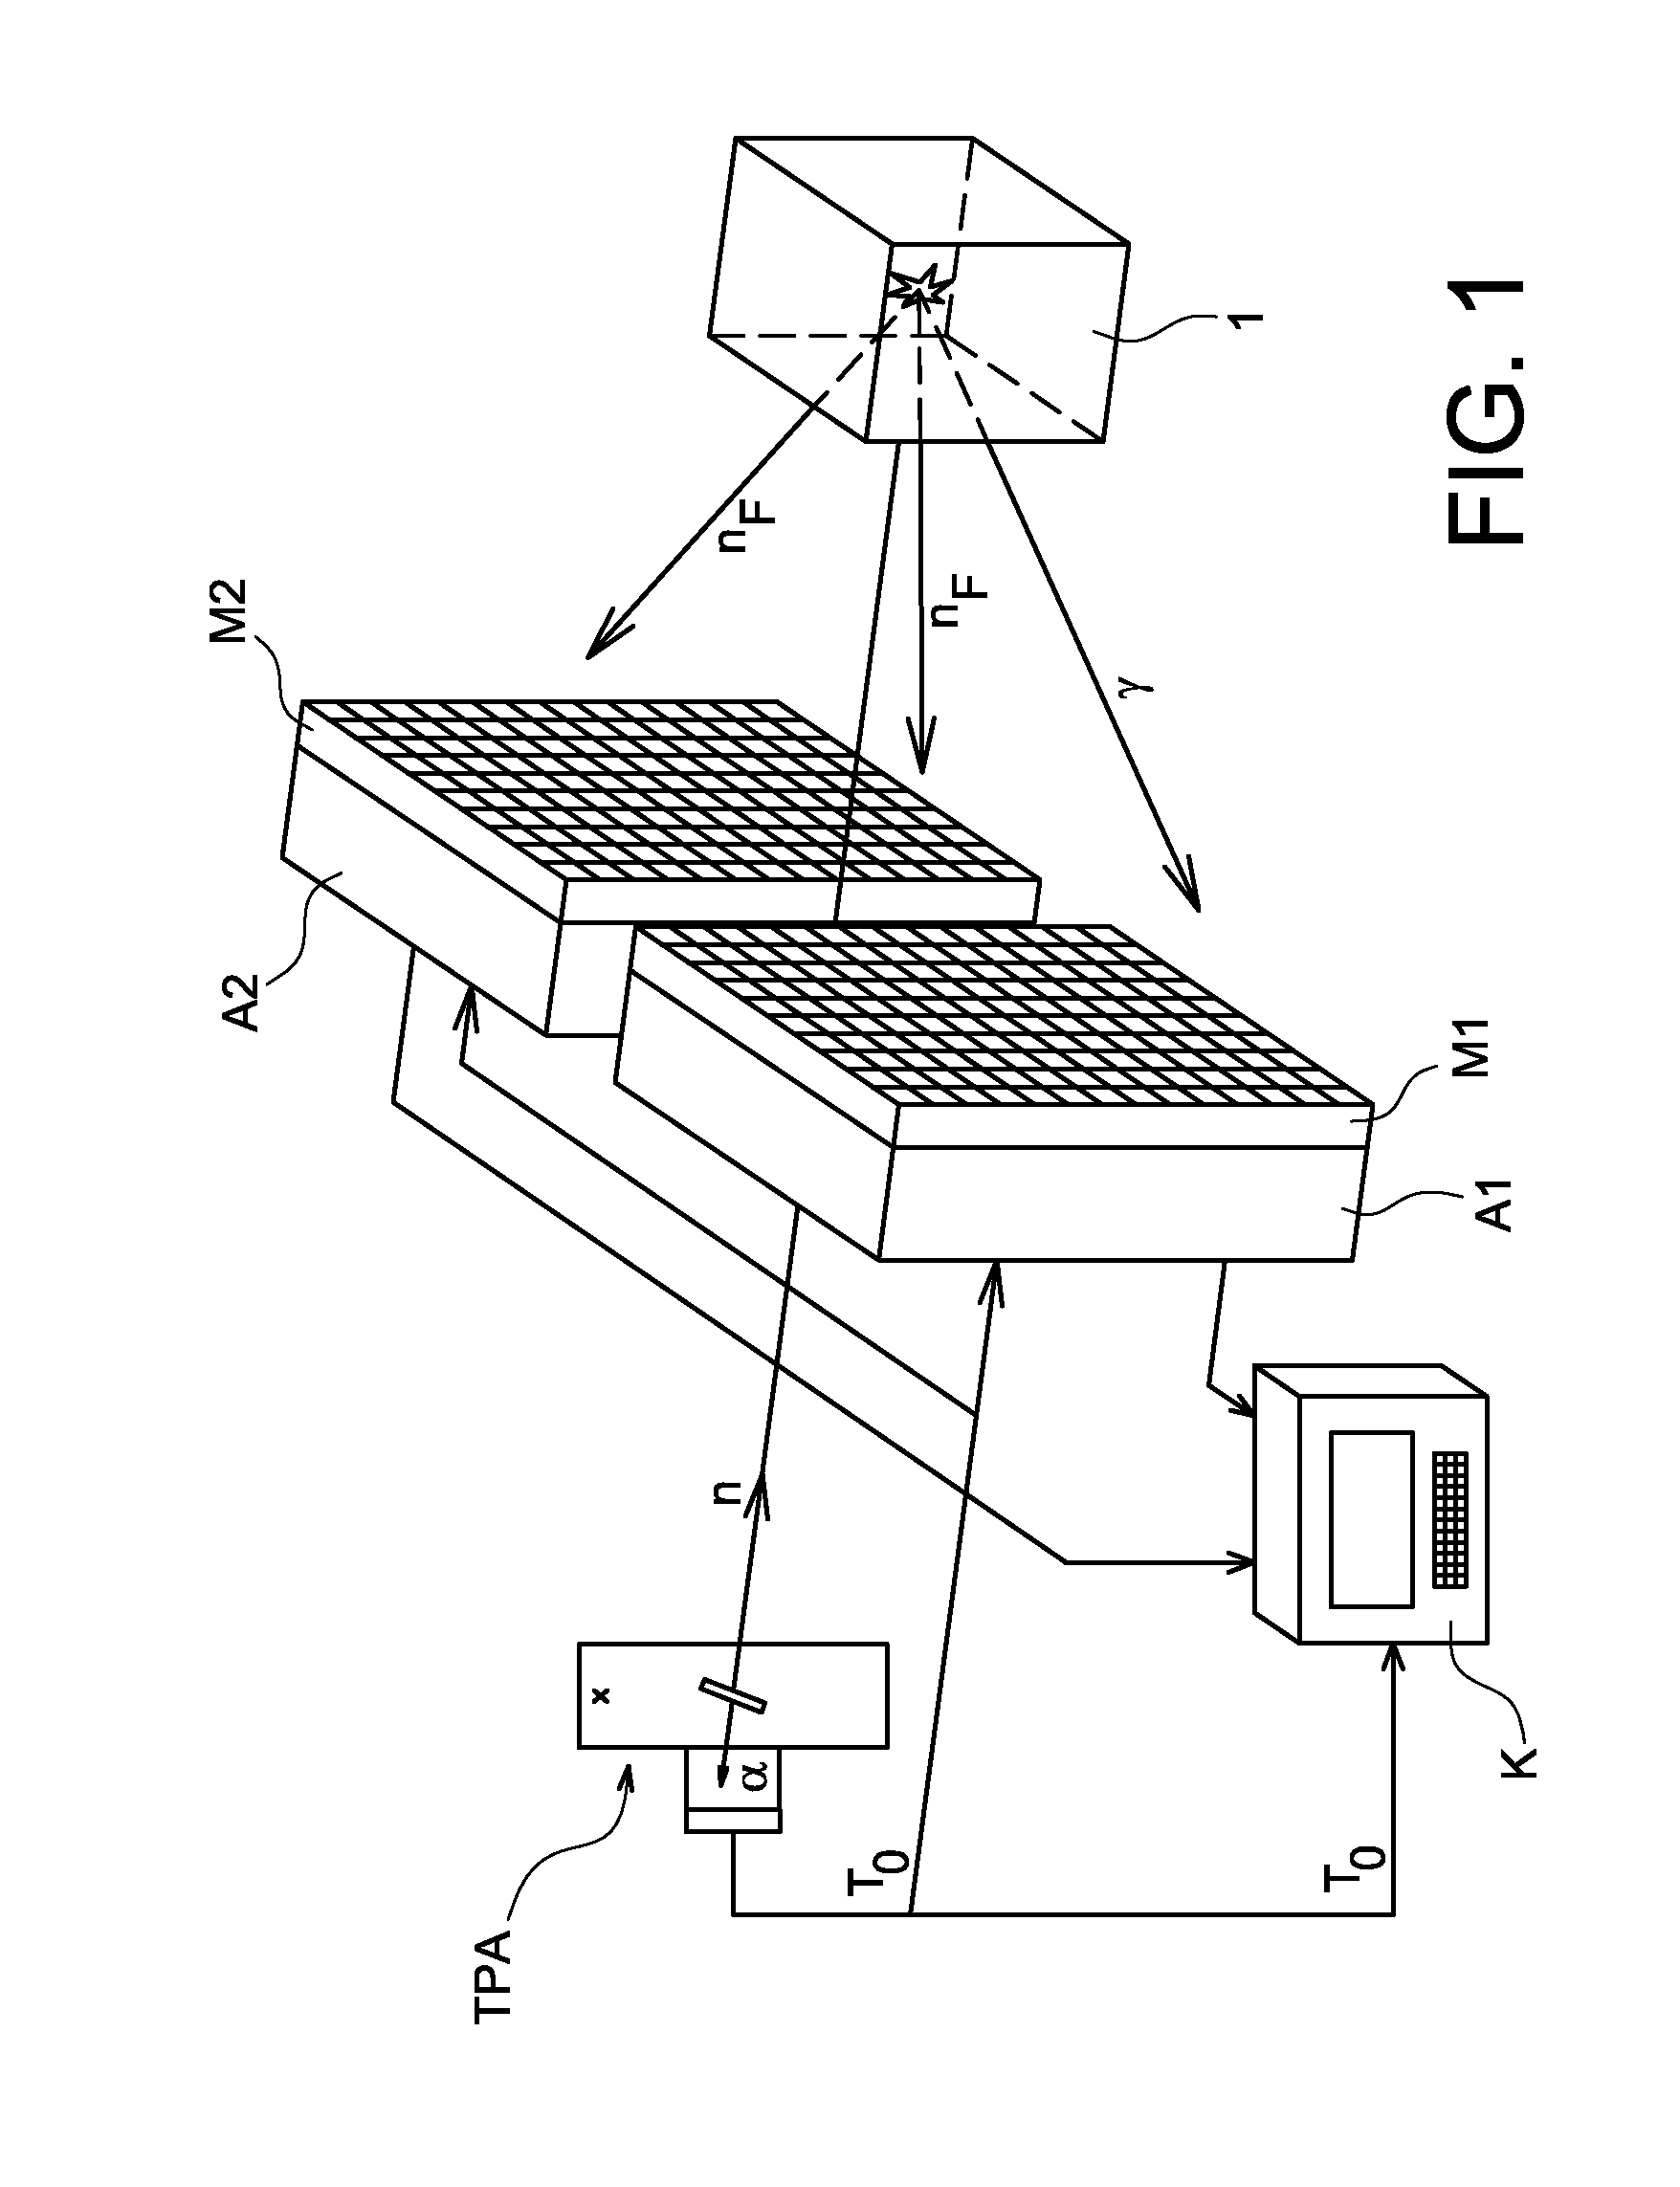 Method for detecting nuclear material by means of neutron interrogation, and related detection system